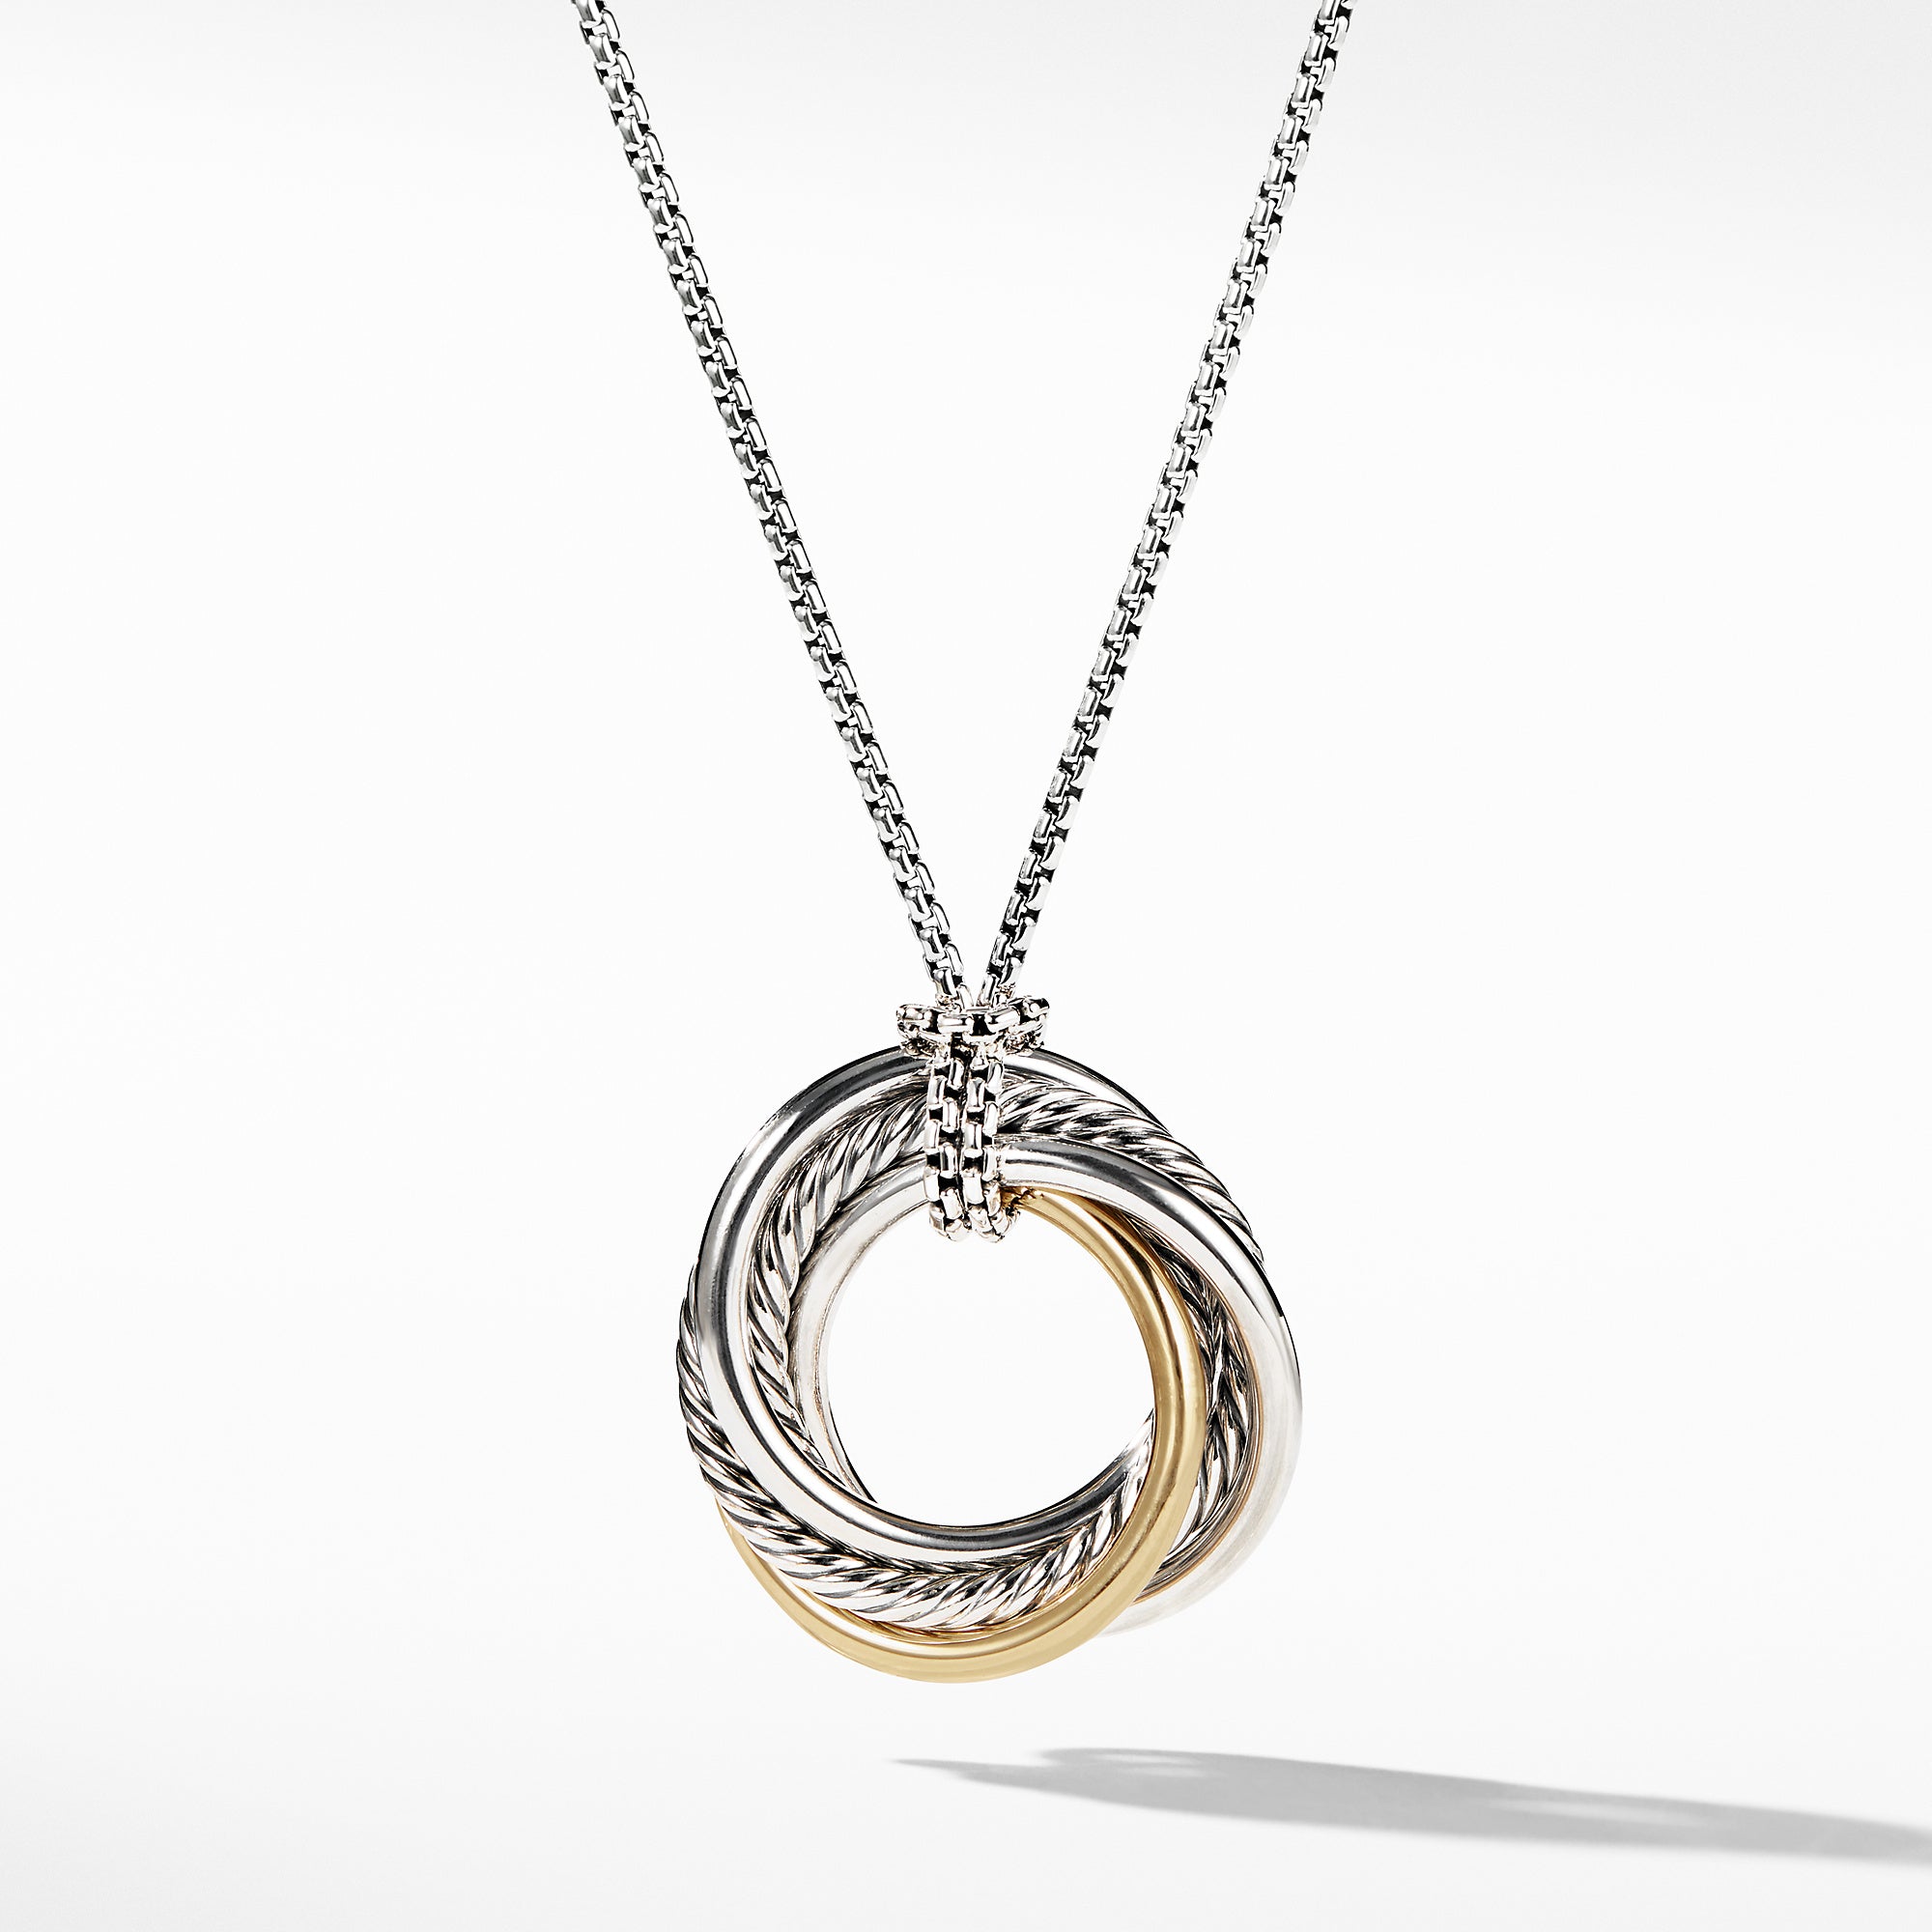 Jewelers David Gold- N11641 Small with Necklace Moyer S4 Fine Crossover Pendant Yurman –